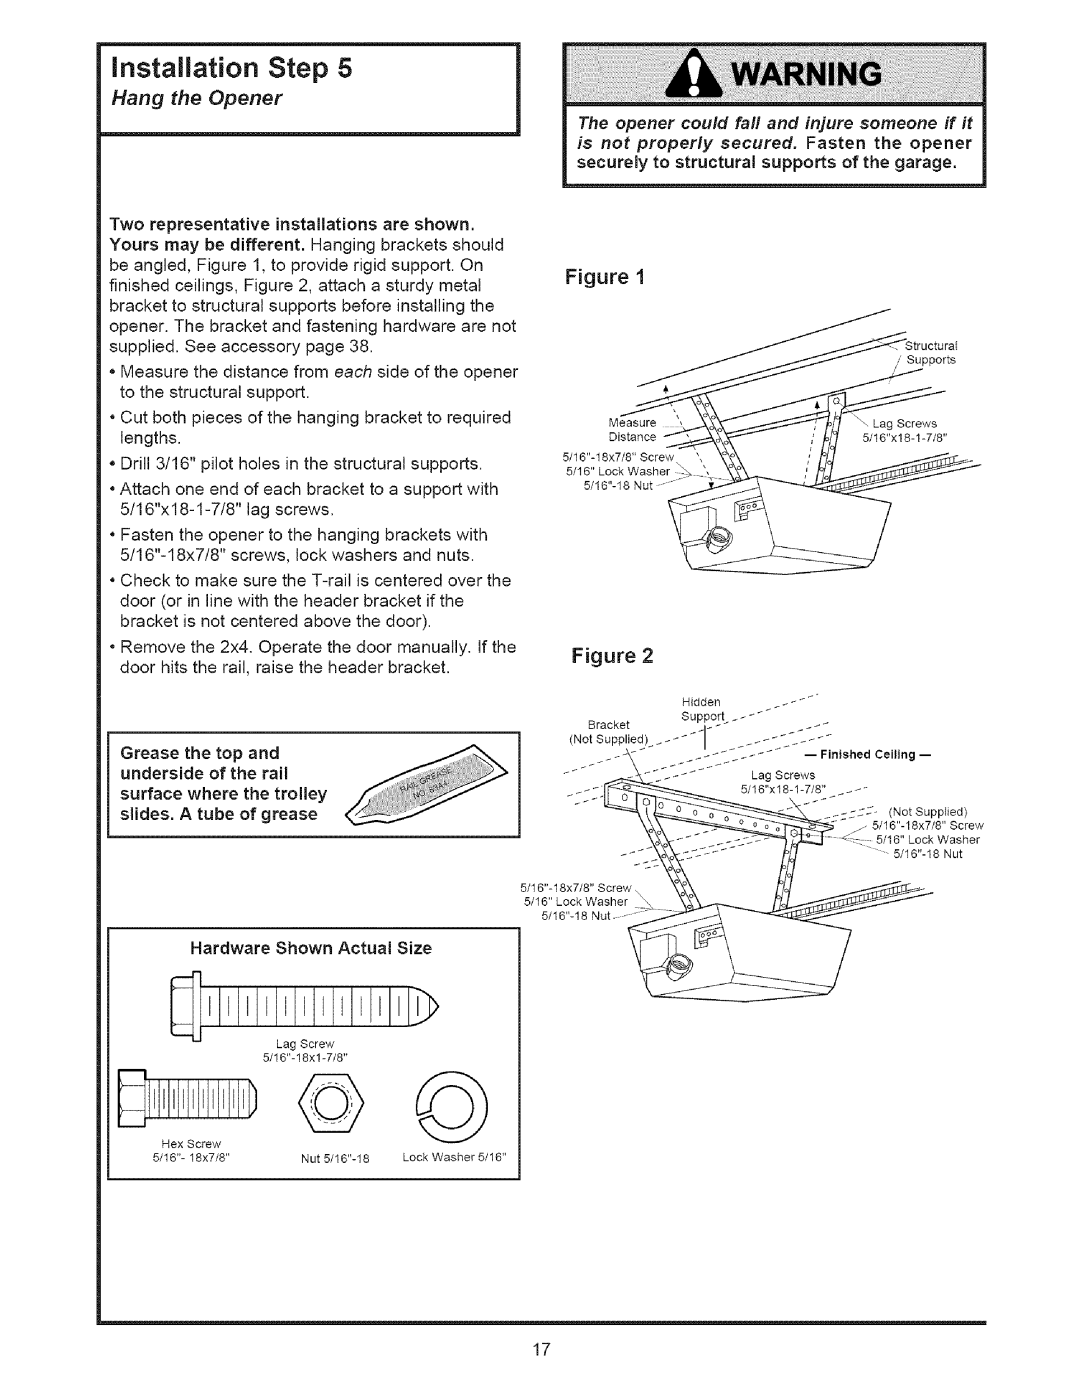 Sears 139.53535SRT1 operating instructions Hang the Opener, underside of the rail, installation Step 